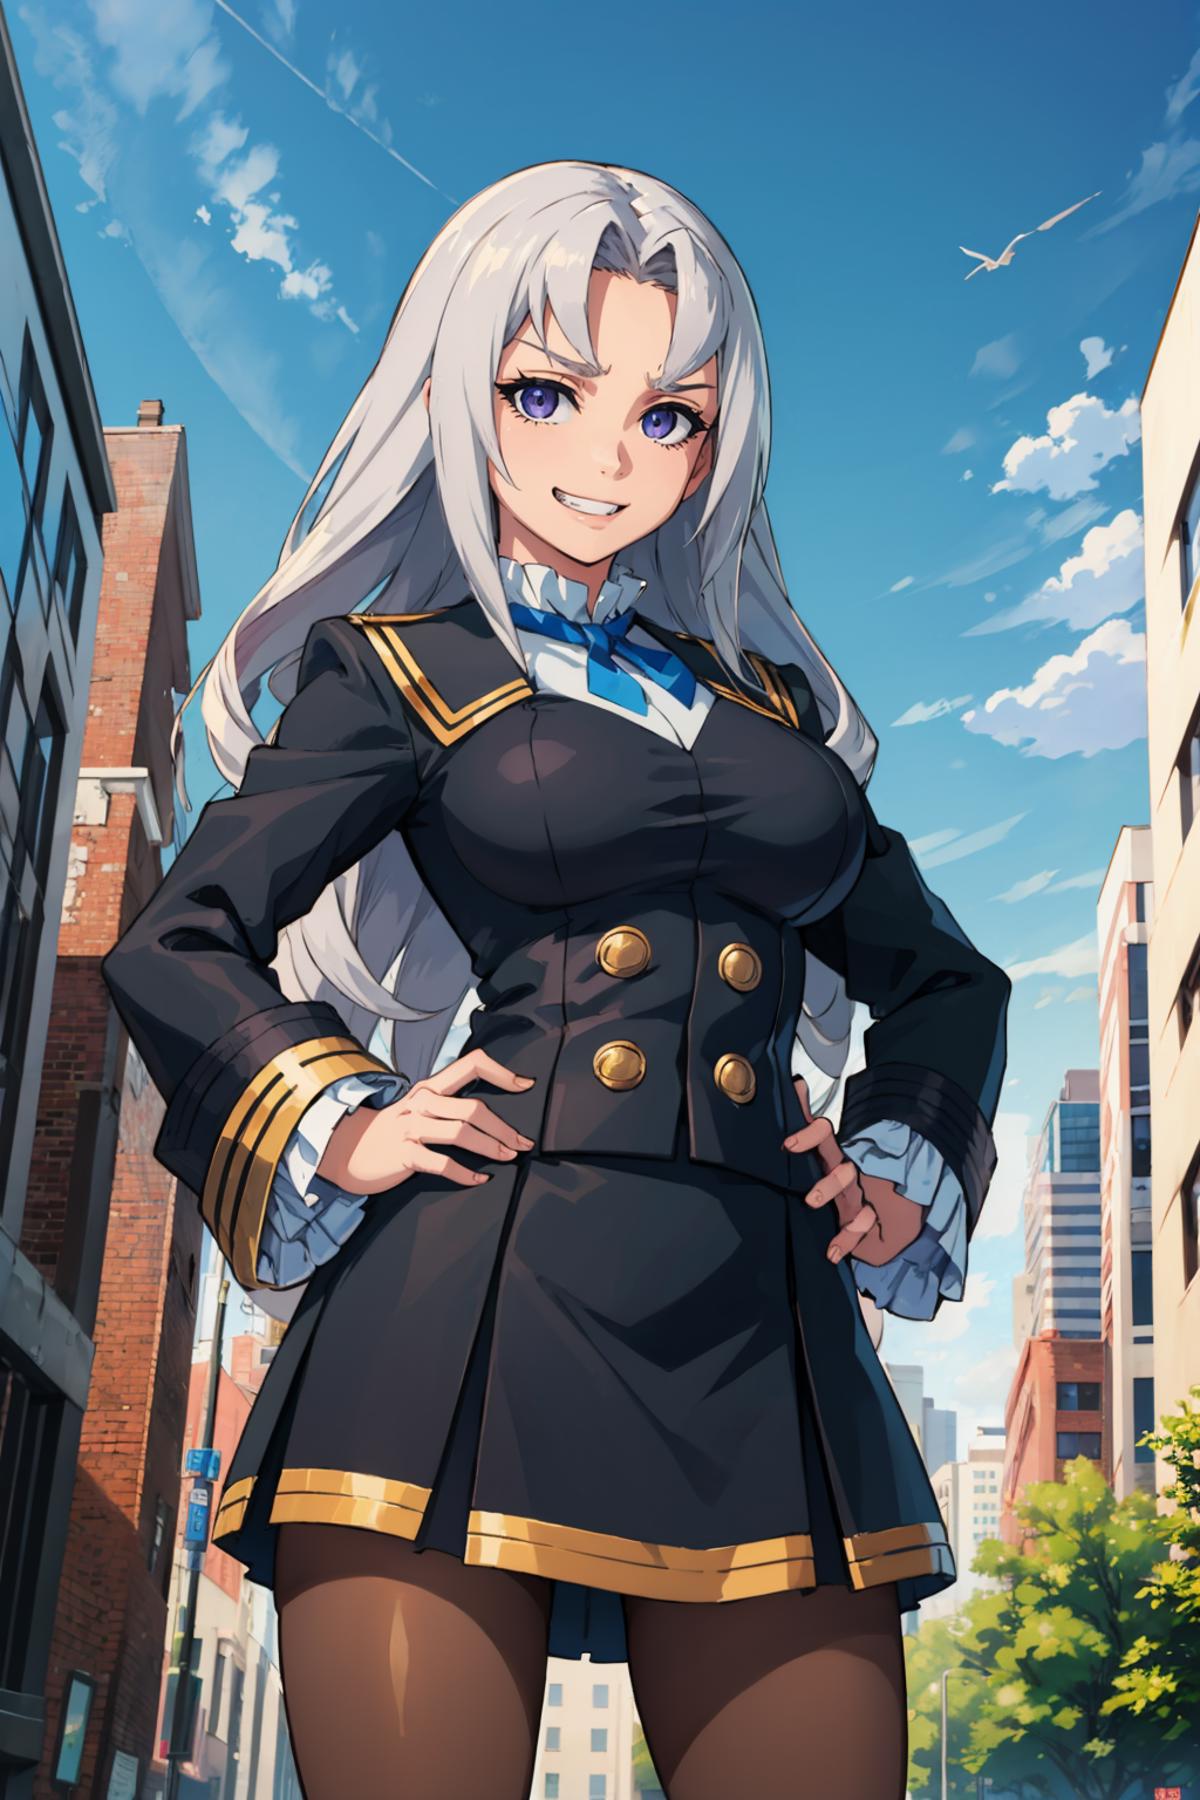 Anime character in a uniform posing in a city street.